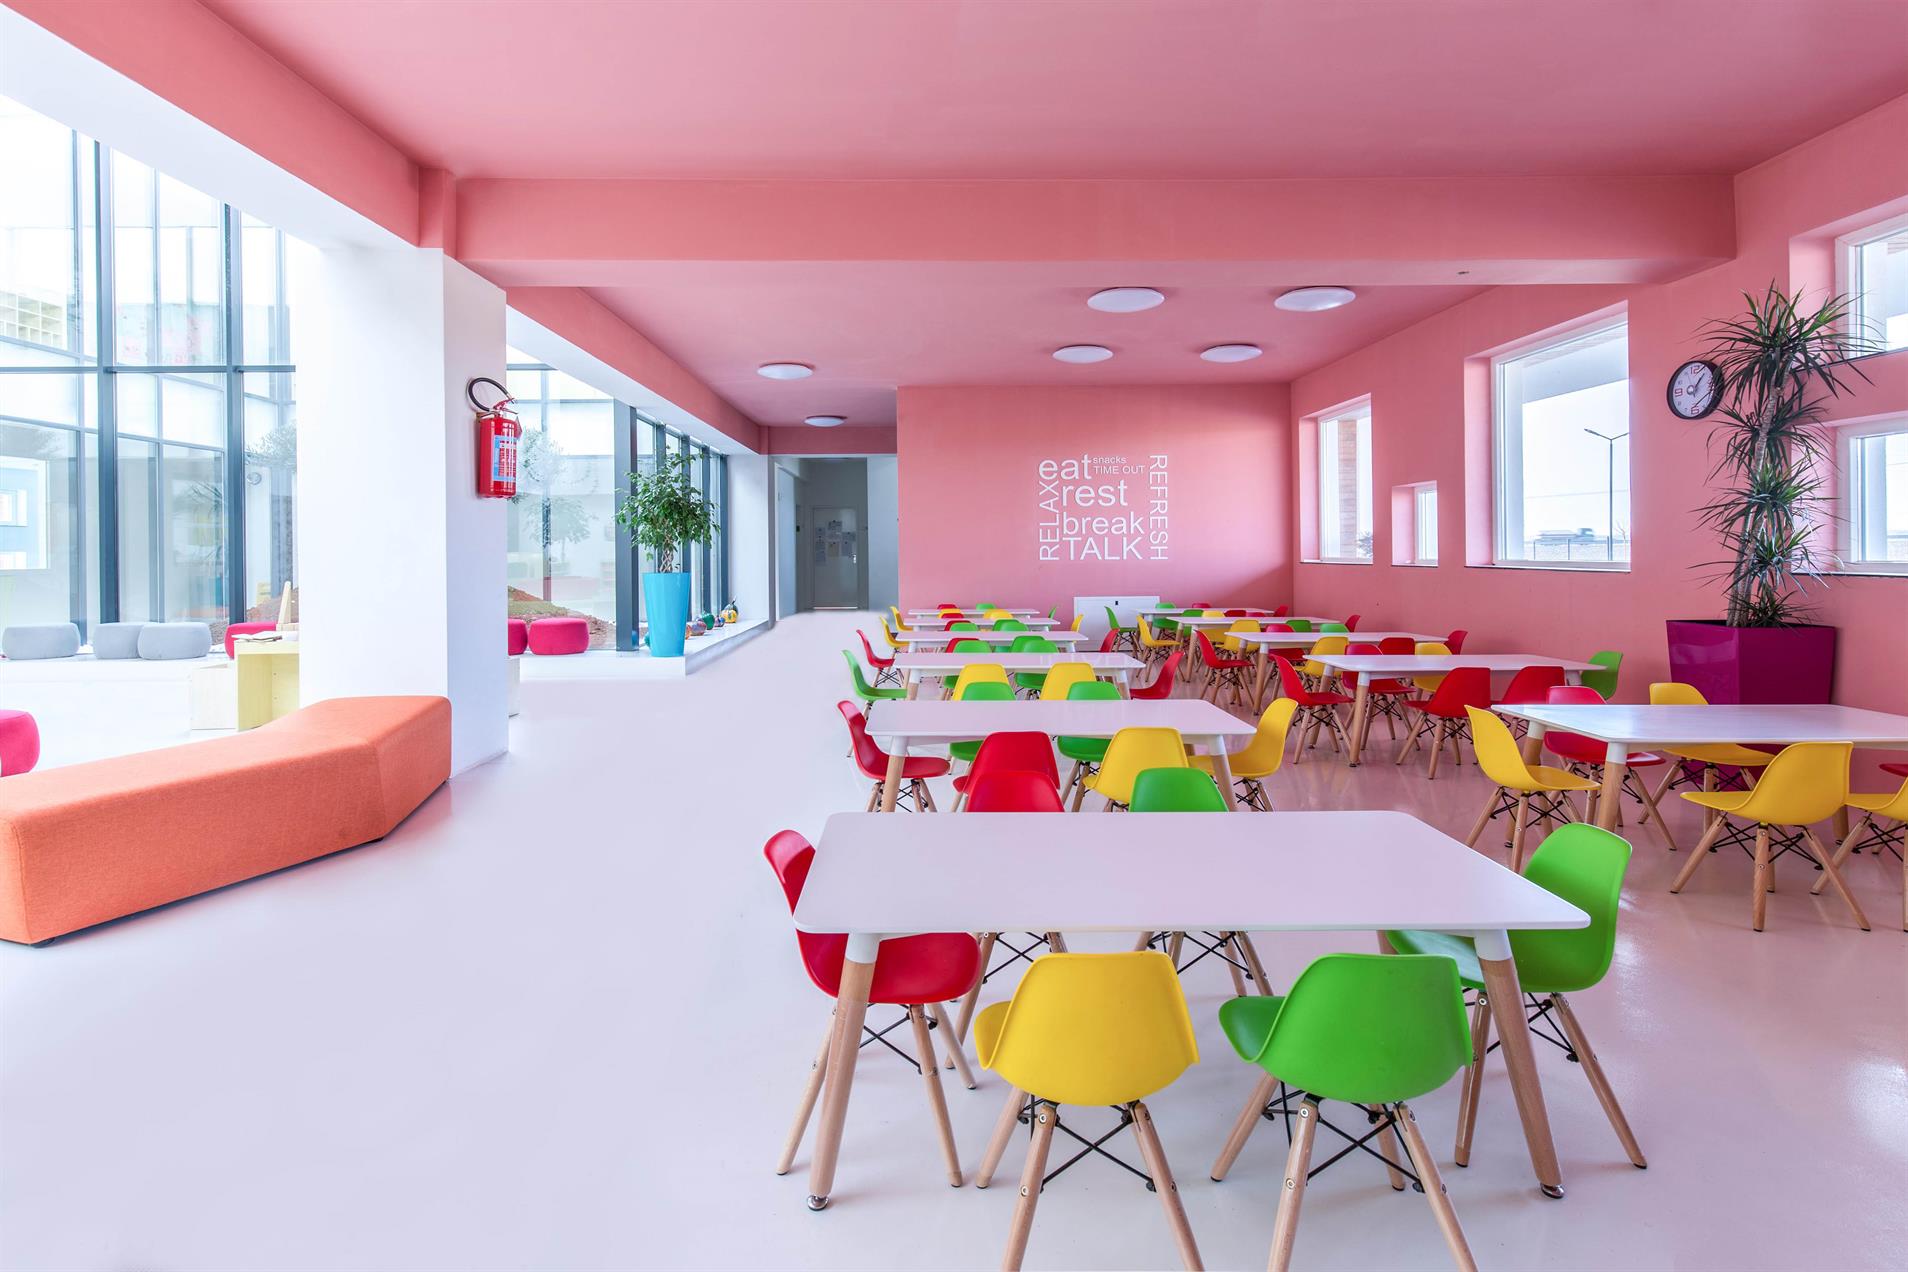 American School of Kosovo by Maden Group